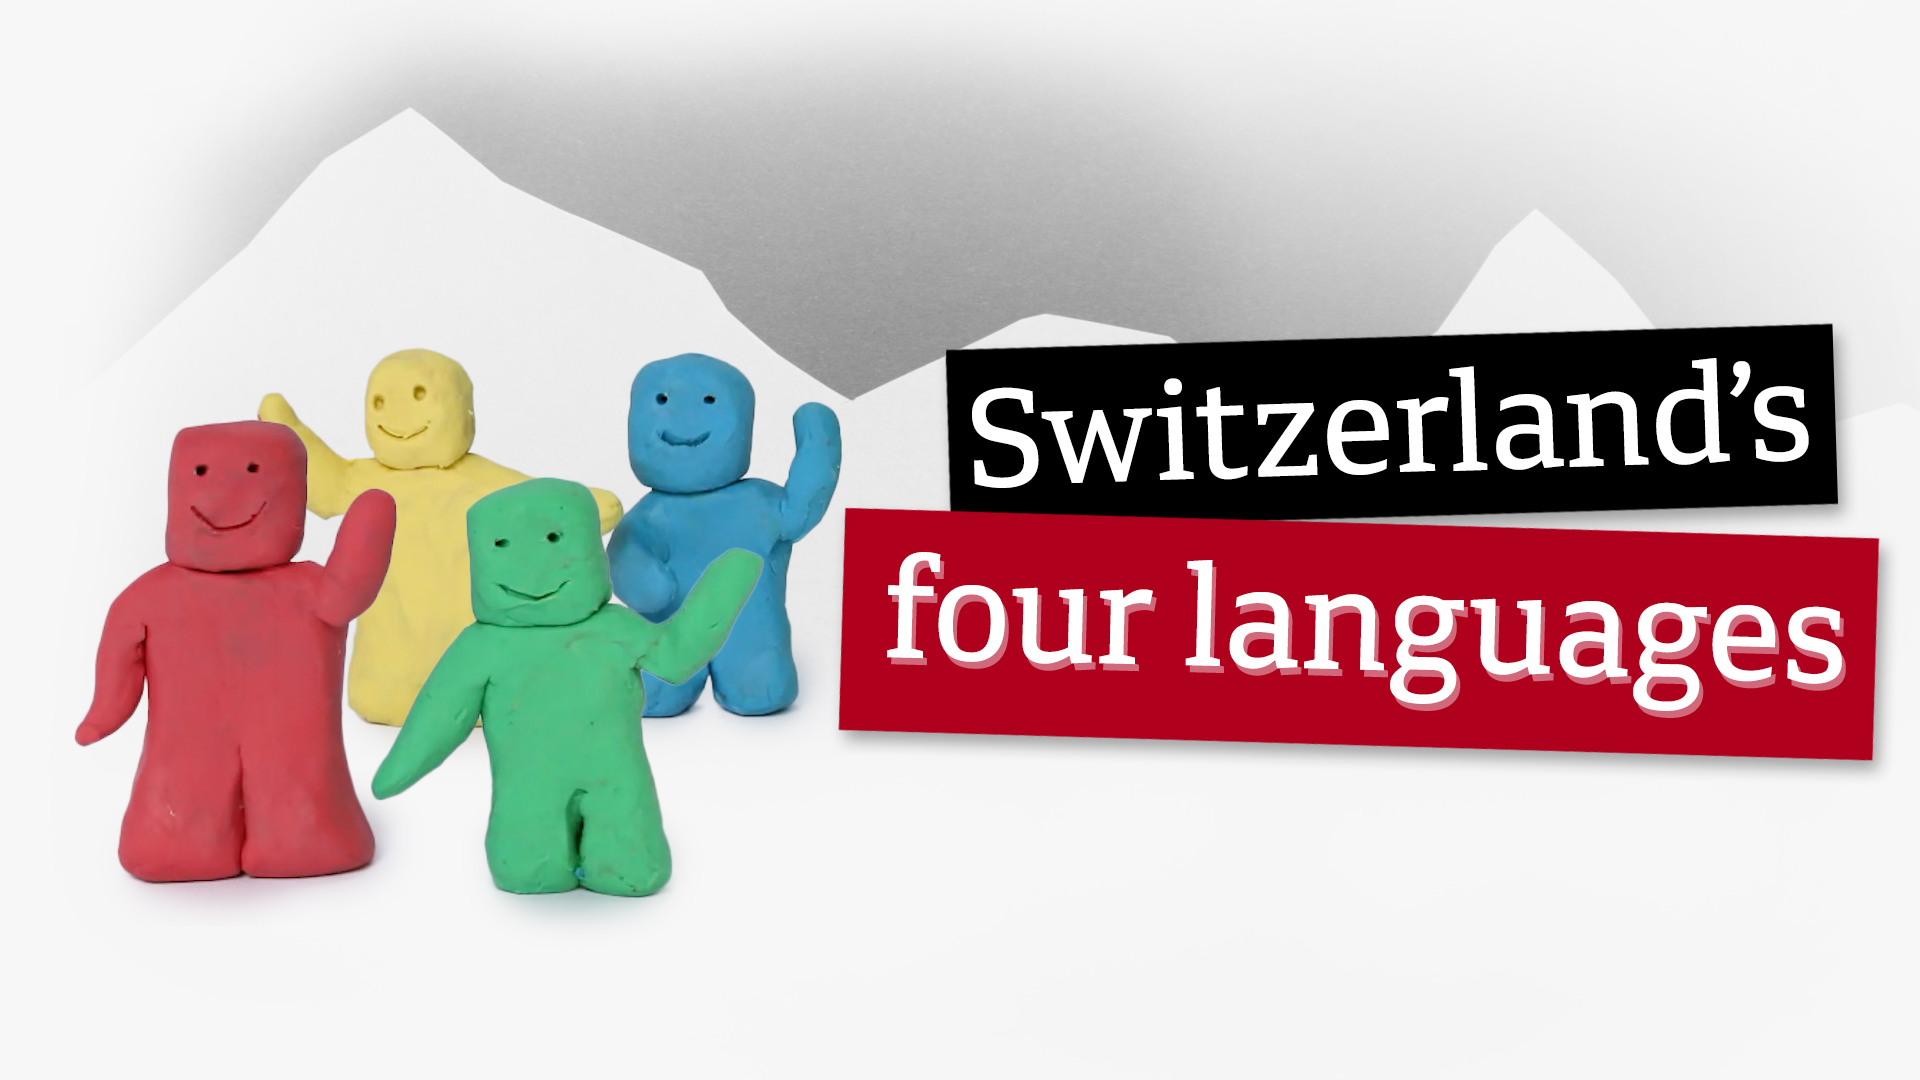 Report on Swtzerland s four languages